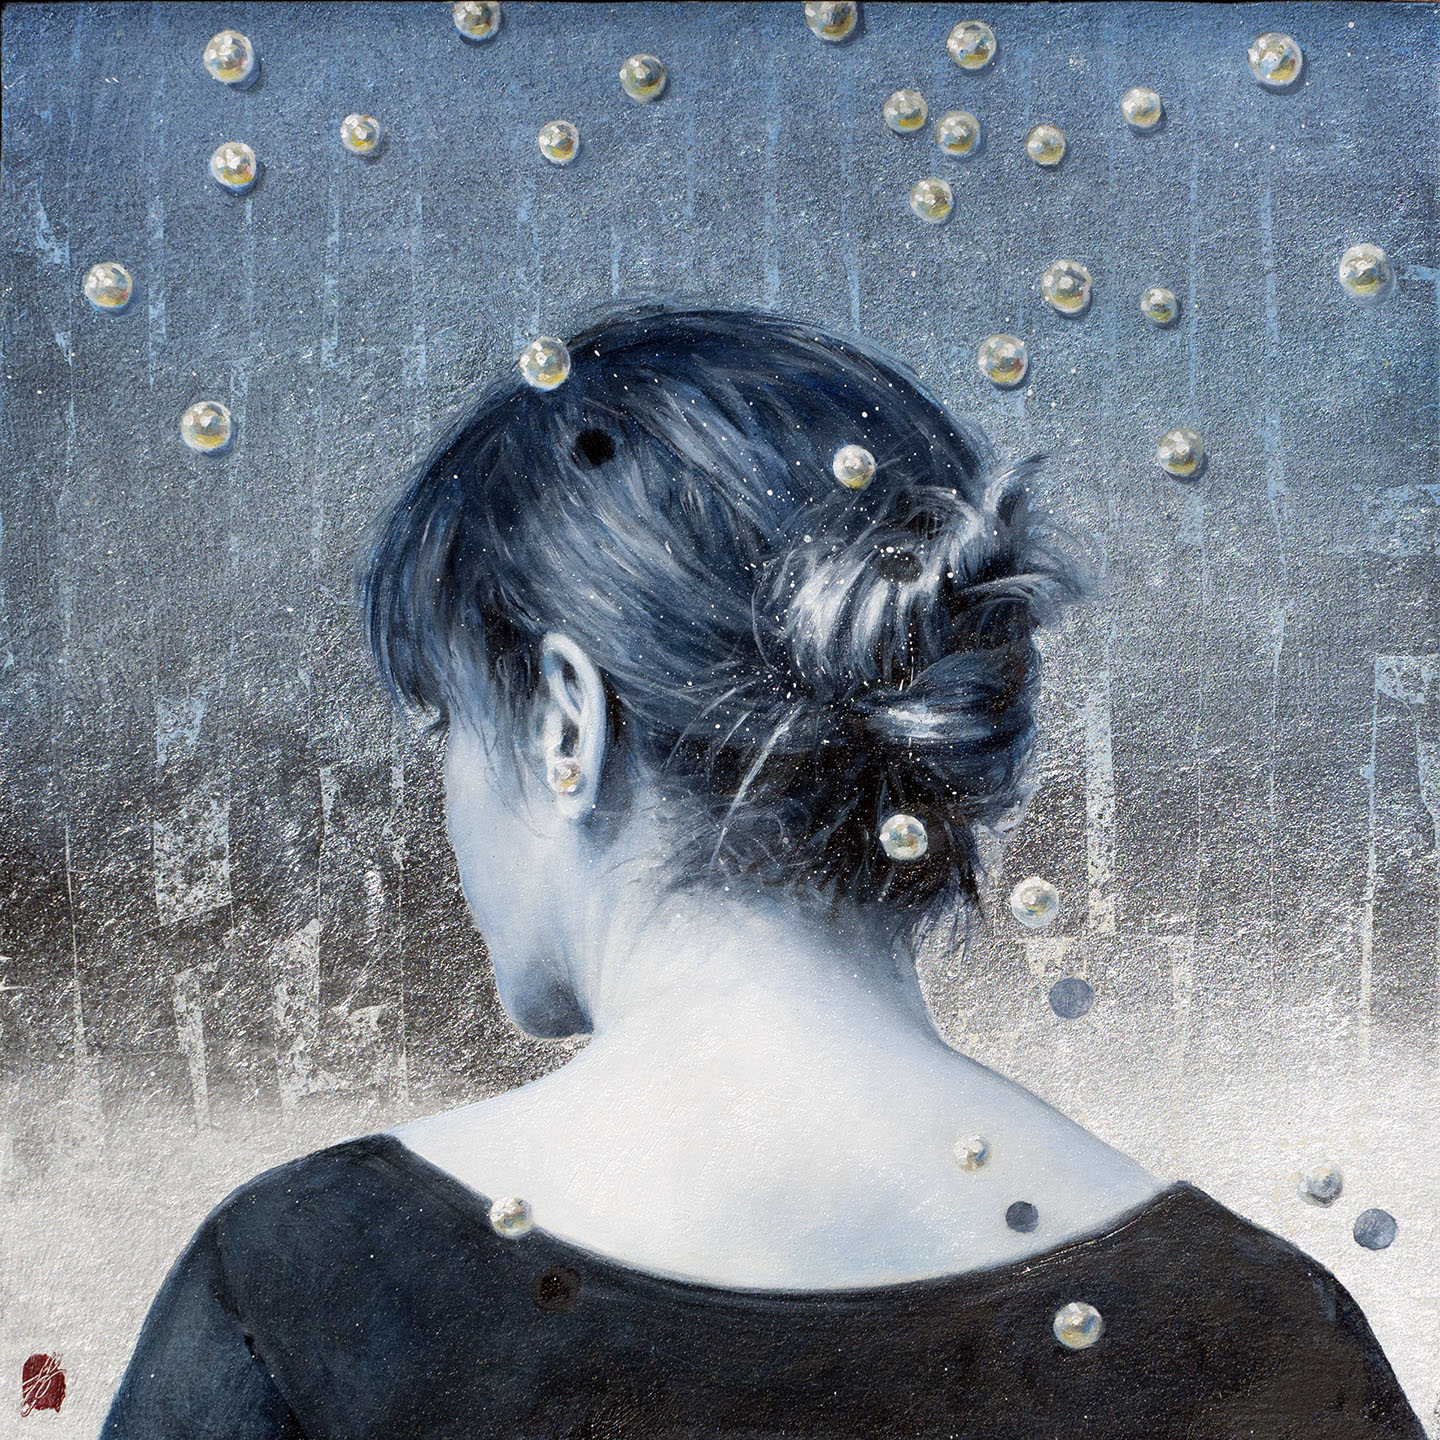 June Stratton, "Pearls in Blue" Oil and Silver Leaf, 12 x 12